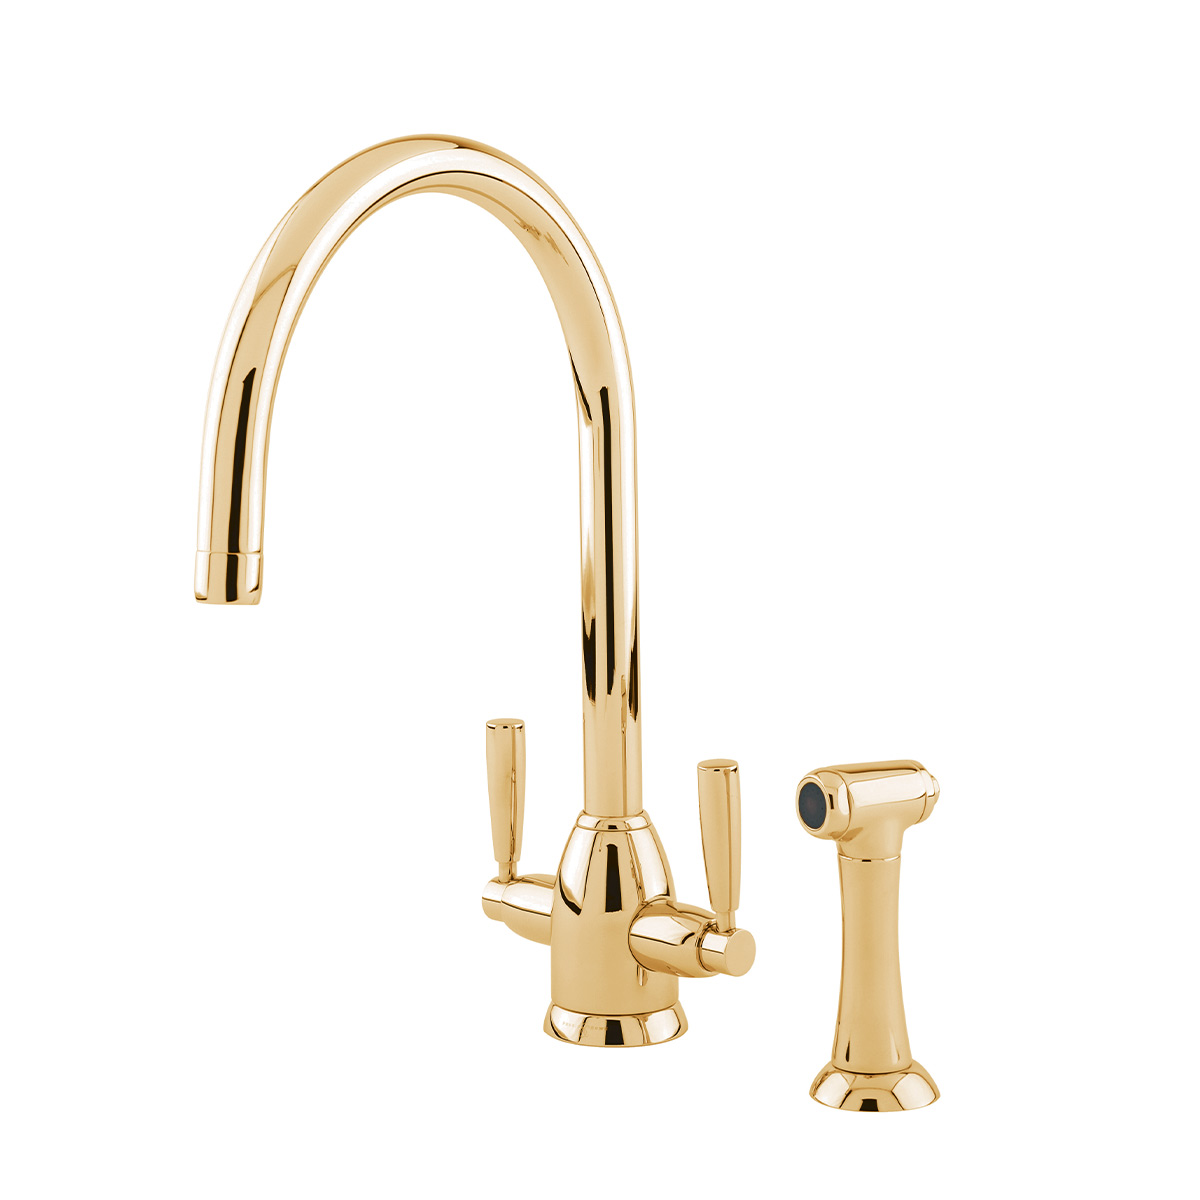 Shaws by Perrin & Rowe Silverdale kitchen mixer with spray rinse in Polished Brass. Oberon style kitchen mixer AUSH.4866. Distributed in Australia by Luxe by Design, Brisbane.